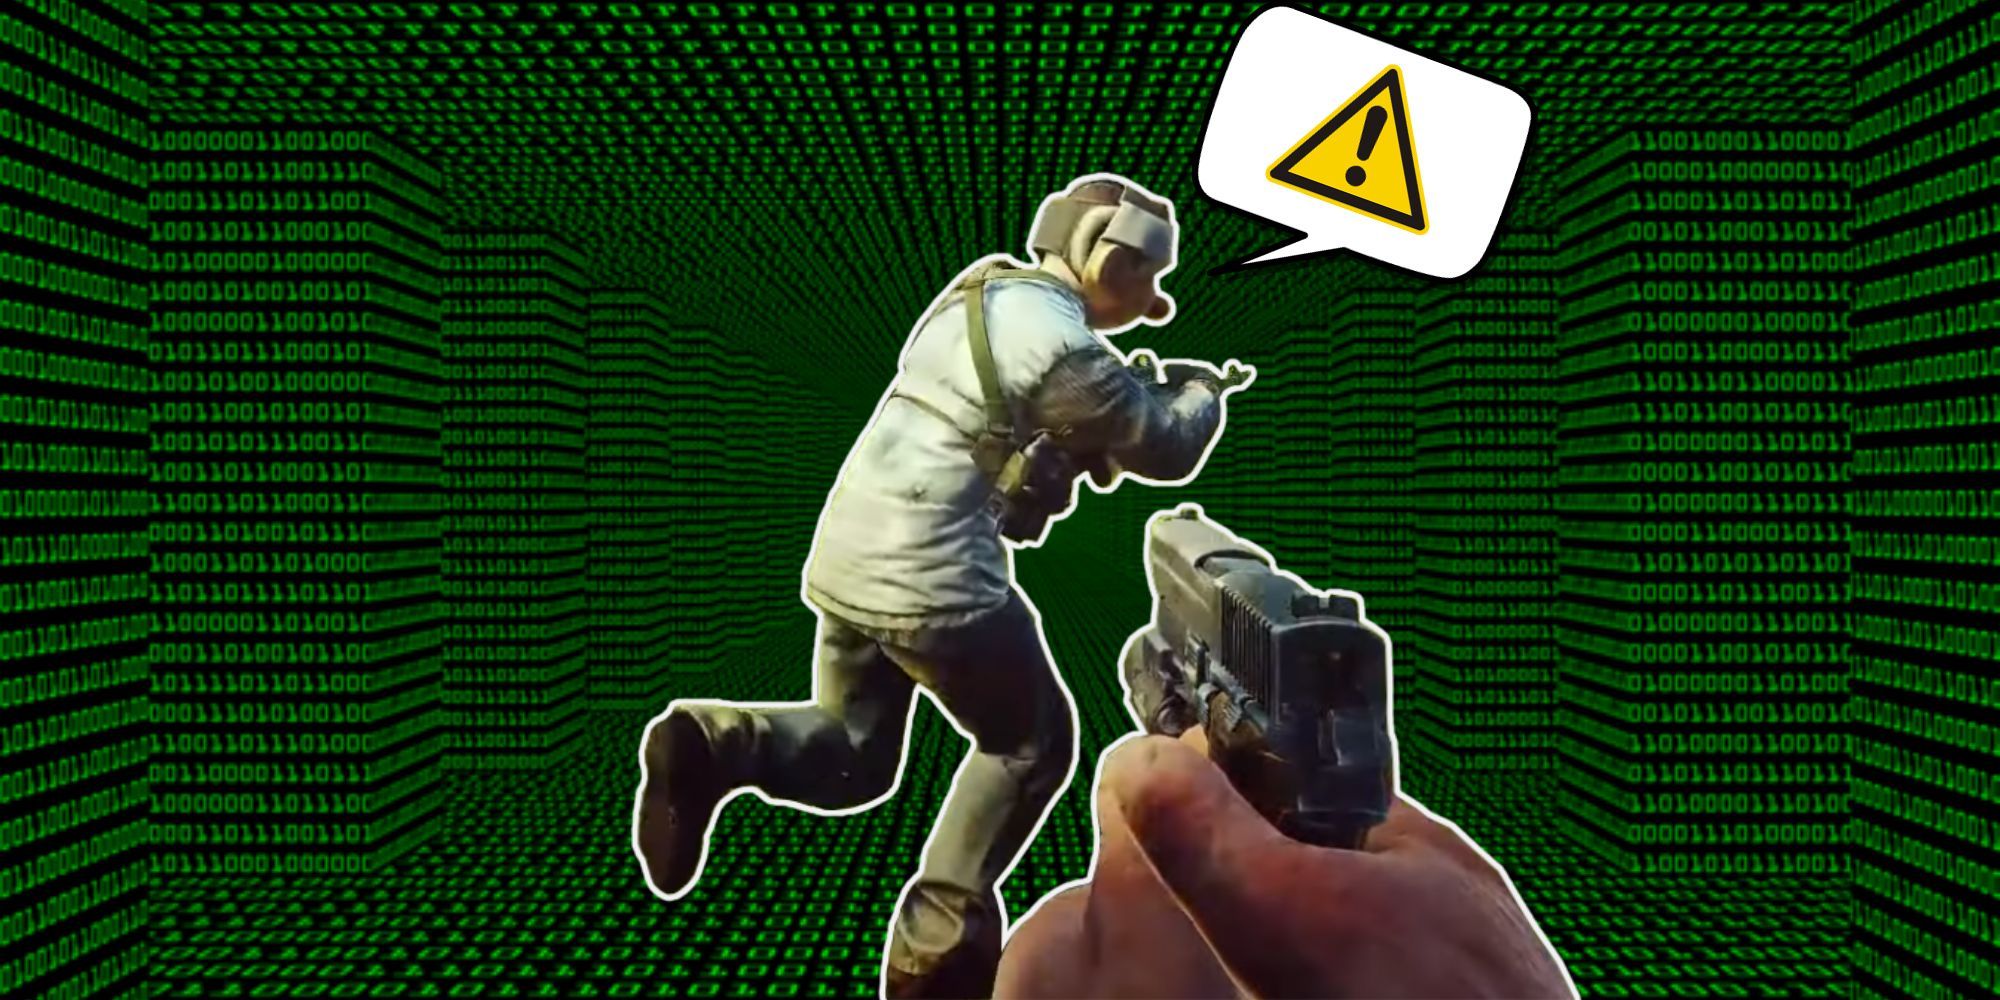 A background with a floor and multiple pillars made of green zeros and ones, and a first-person view of two hands holding a pistol pointed at a fleeing NPC.